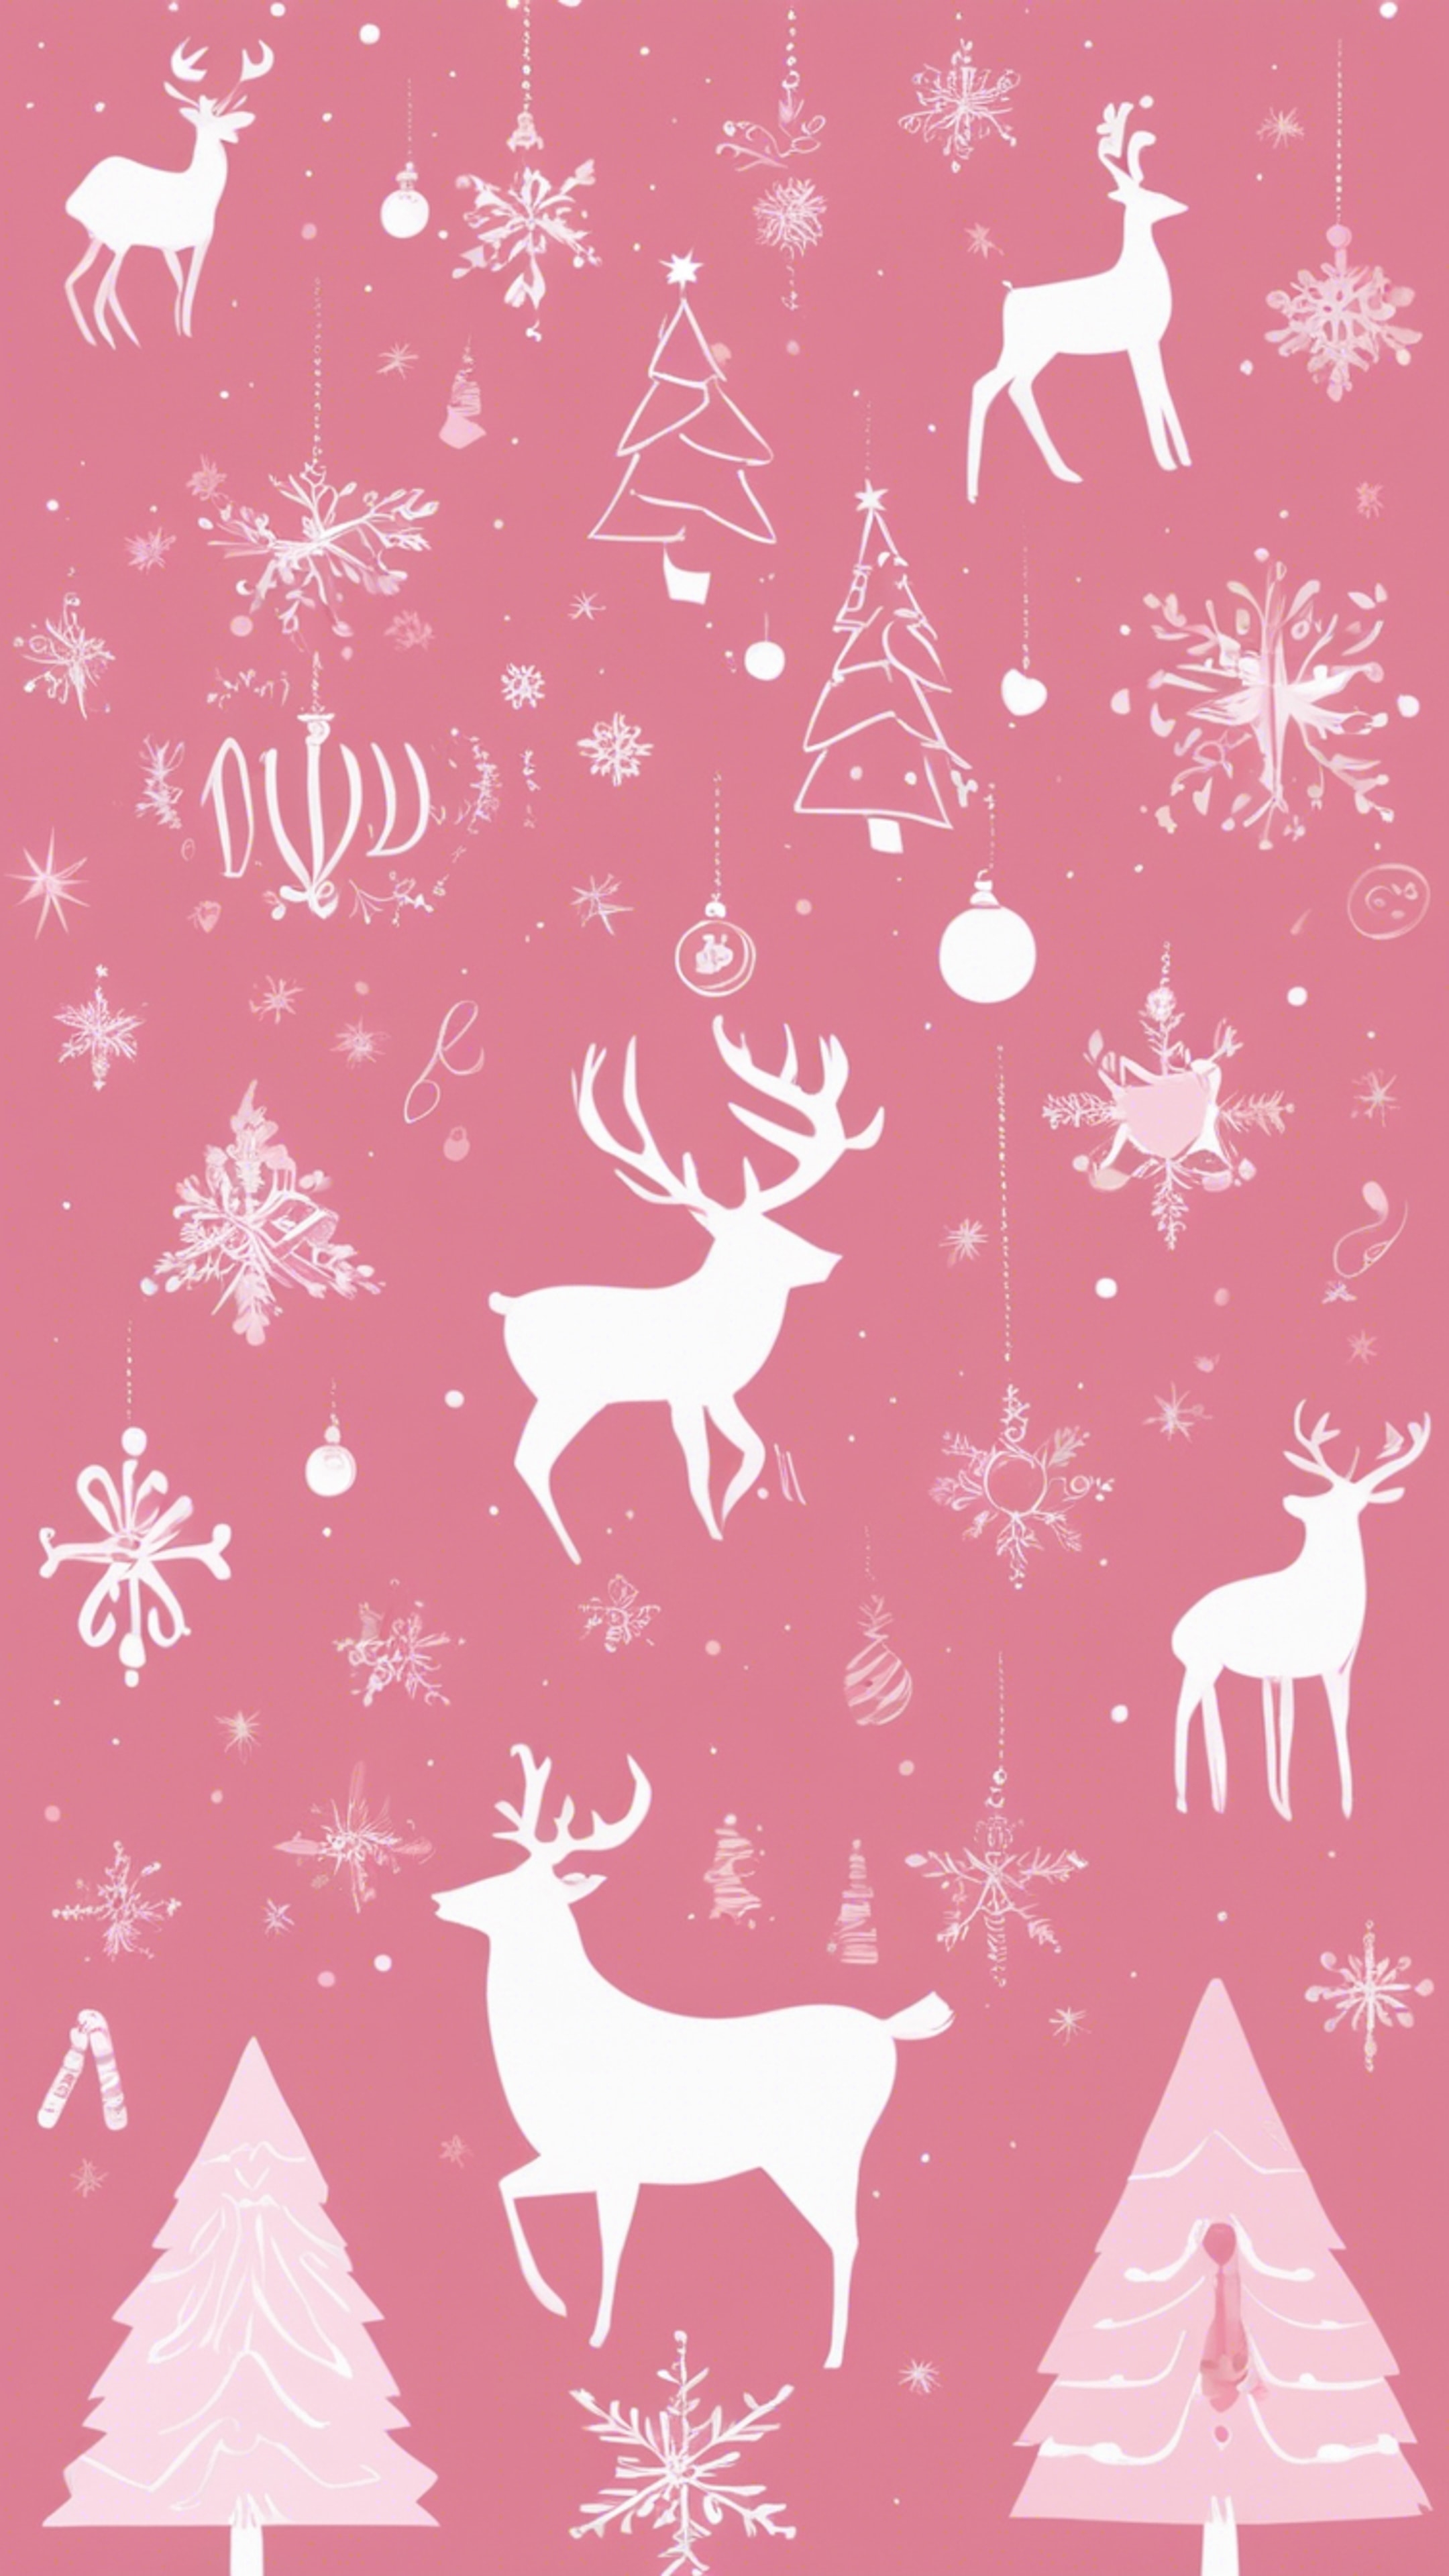 A minimally designed Christmas card with elegant pink illustrations of Christmas icons. 墙纸[9459a801713f4624aabe]